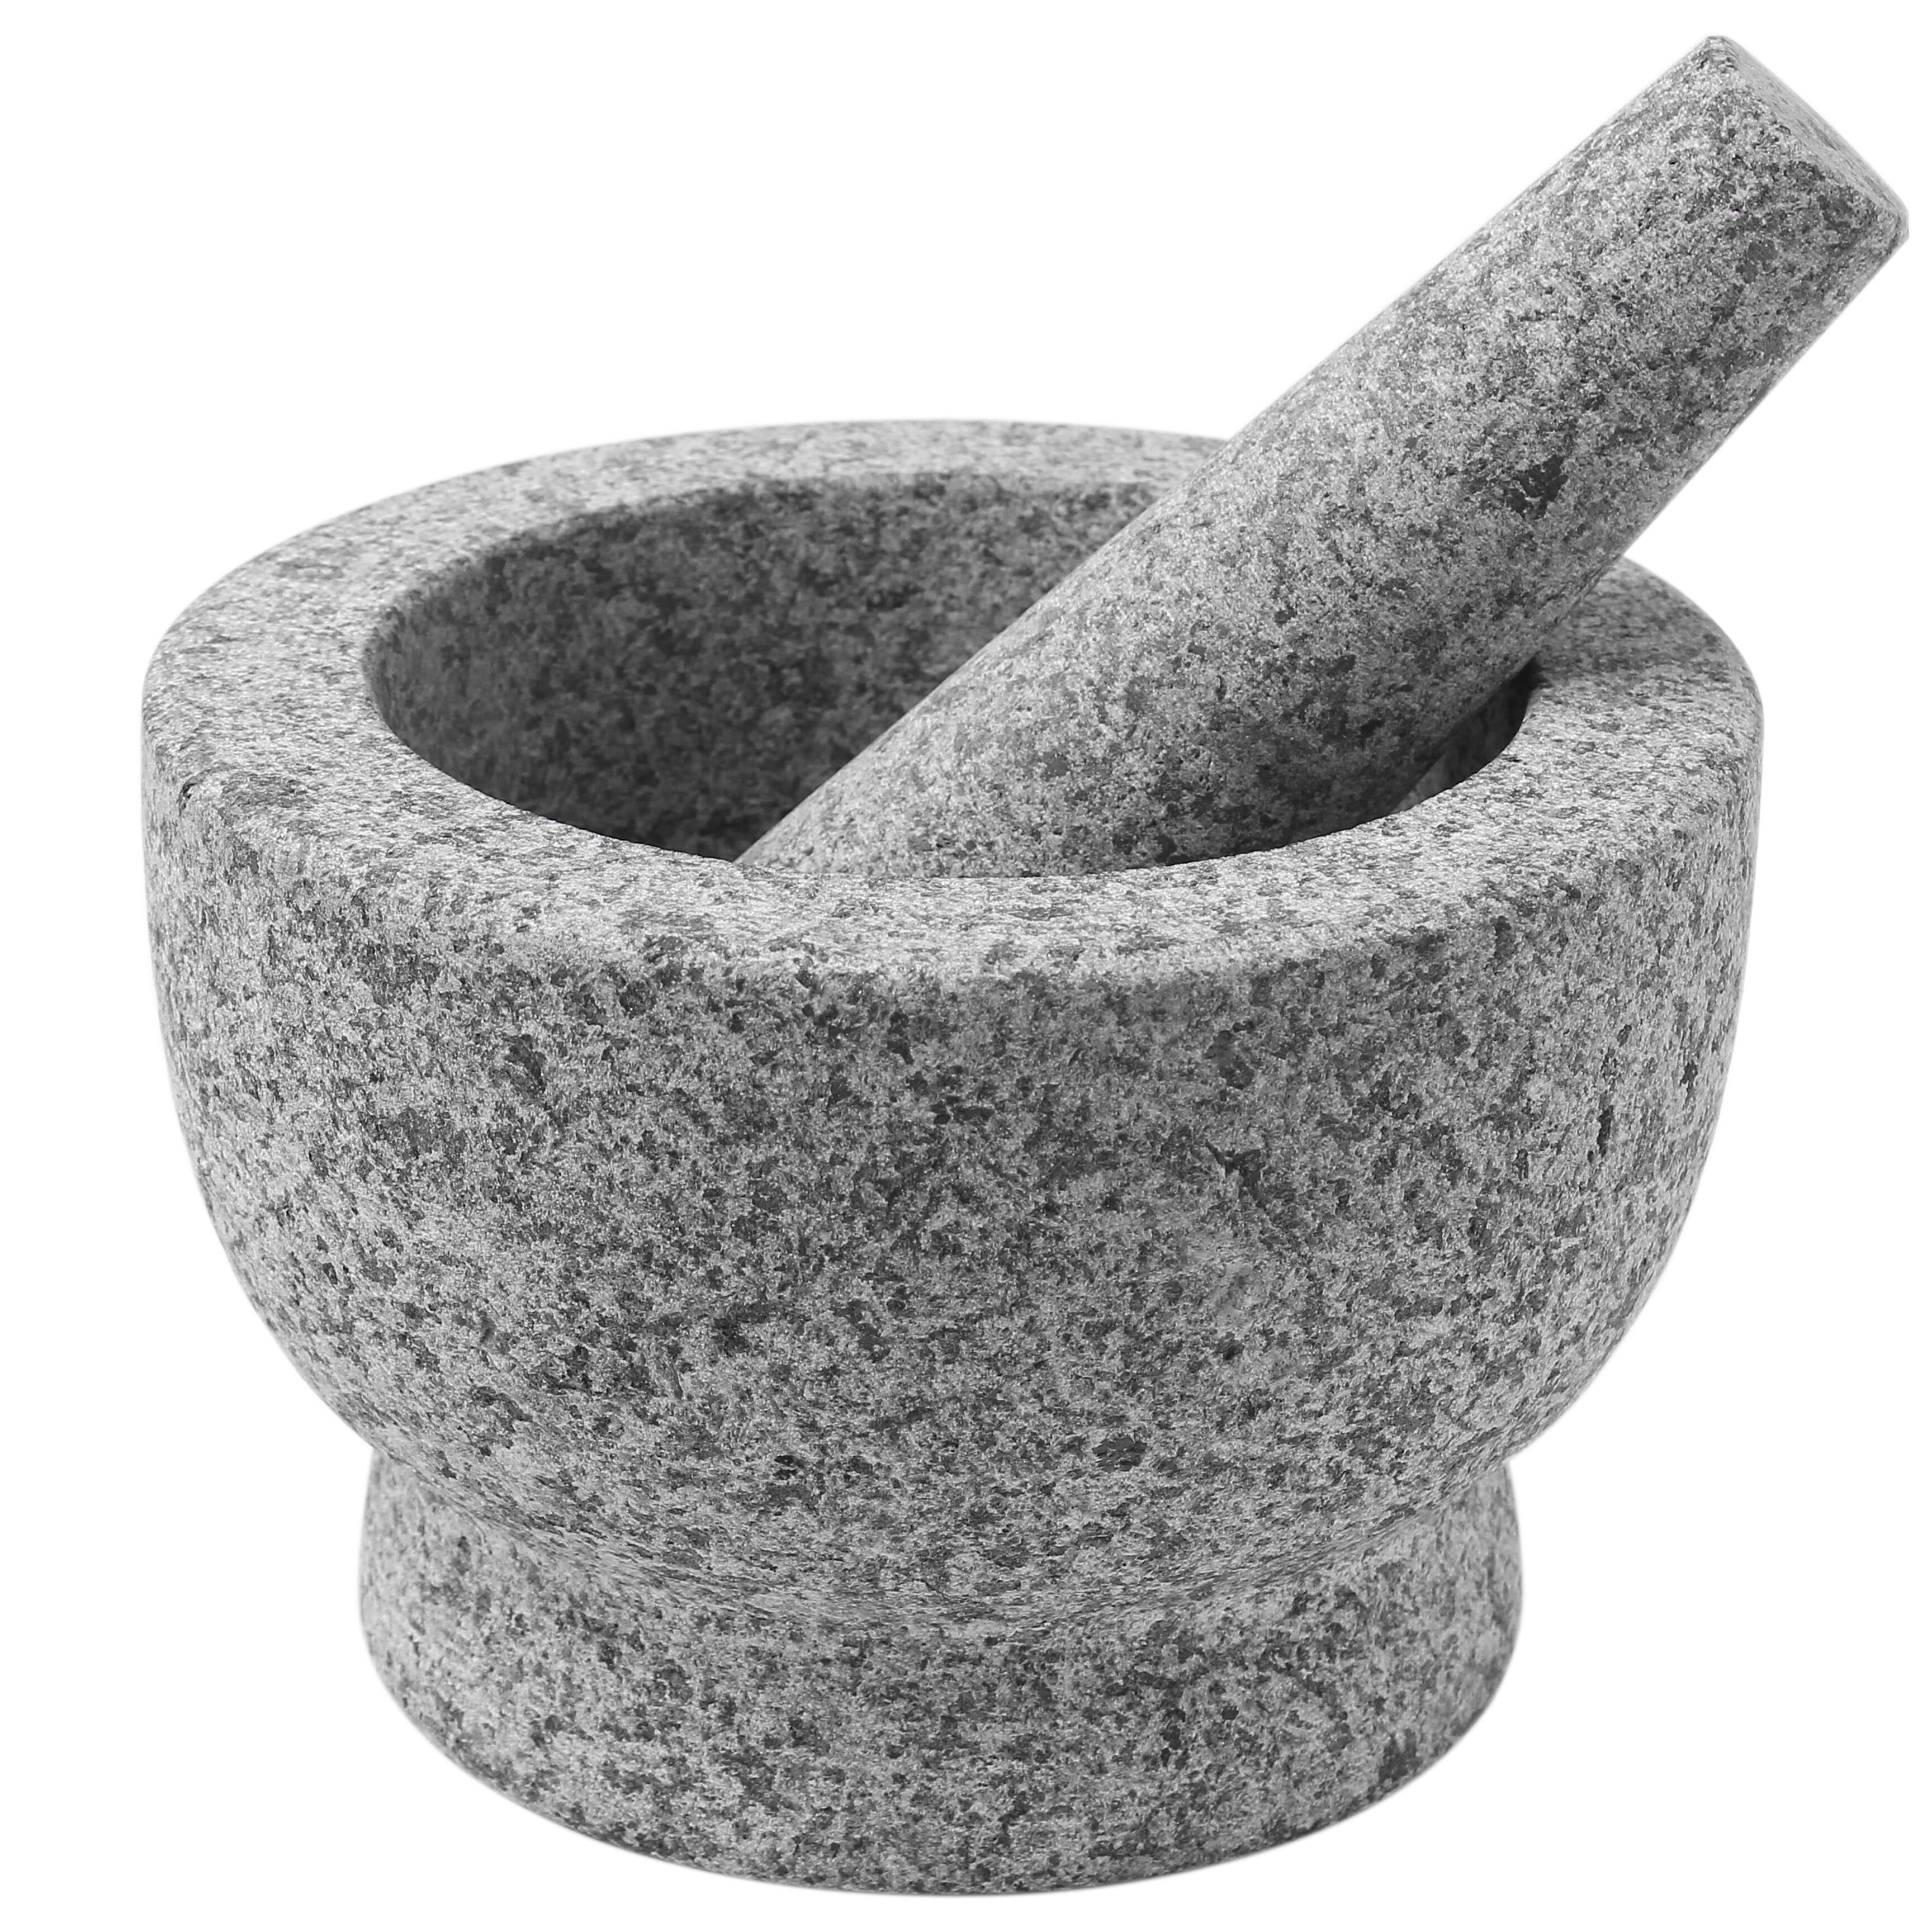 Amazon: Mortar and Pestle Set - 6 Inch, 2 Cup-Capacity, 7 pounds - $19.82 + Free Shipping for Amazon Prime Members